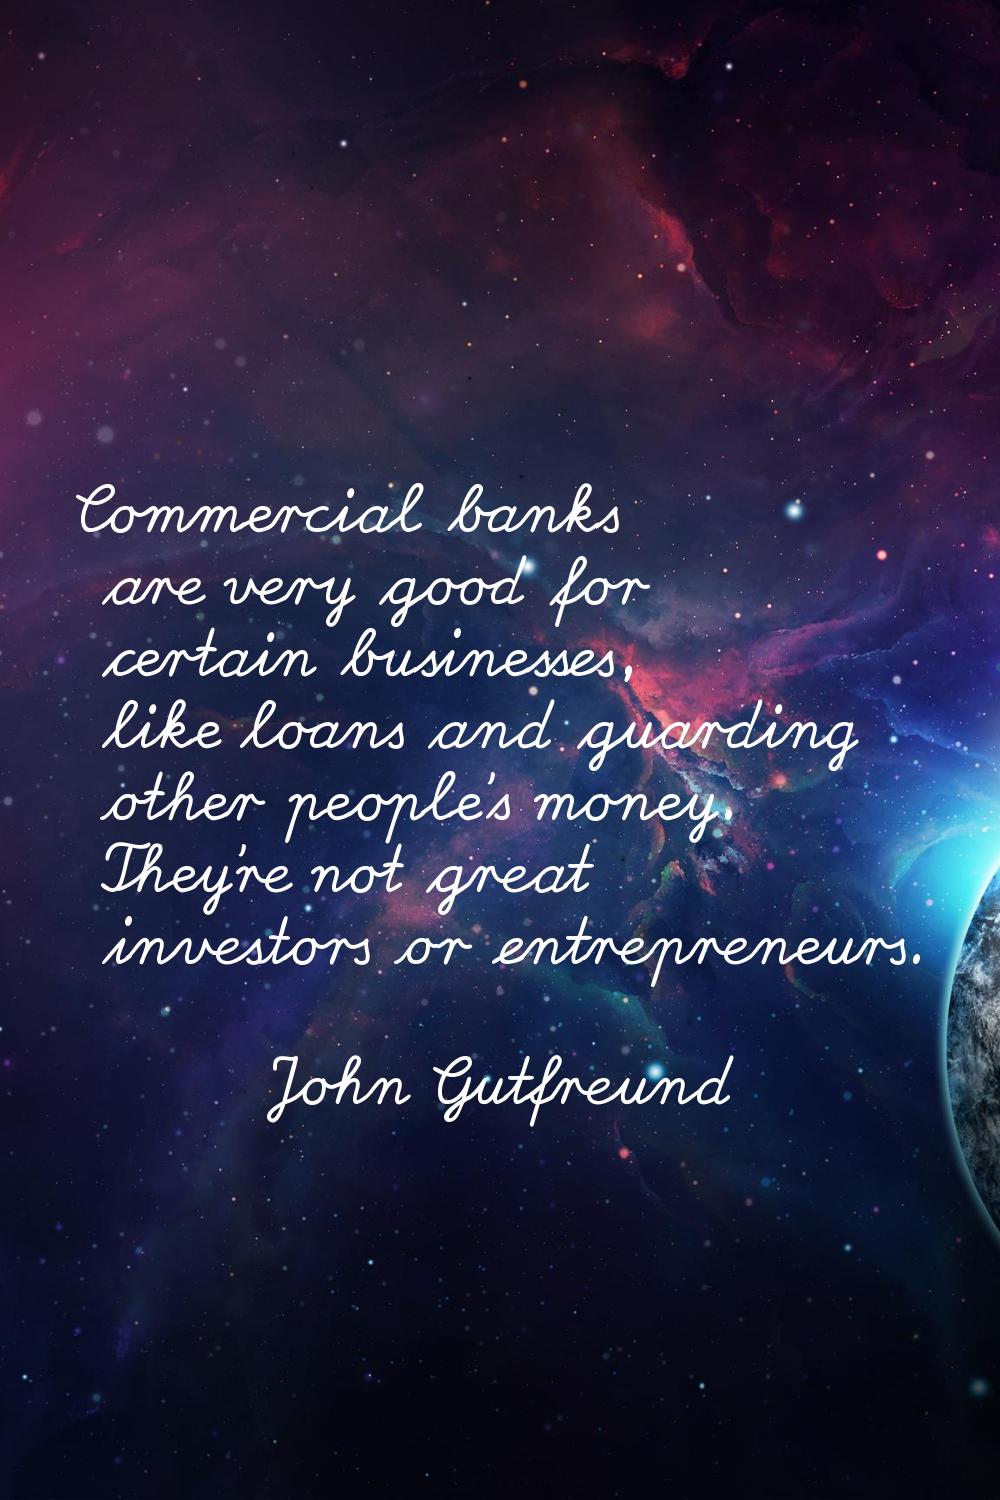 Commercial banks are very good for certain businesses, like loans and guarding other people's money